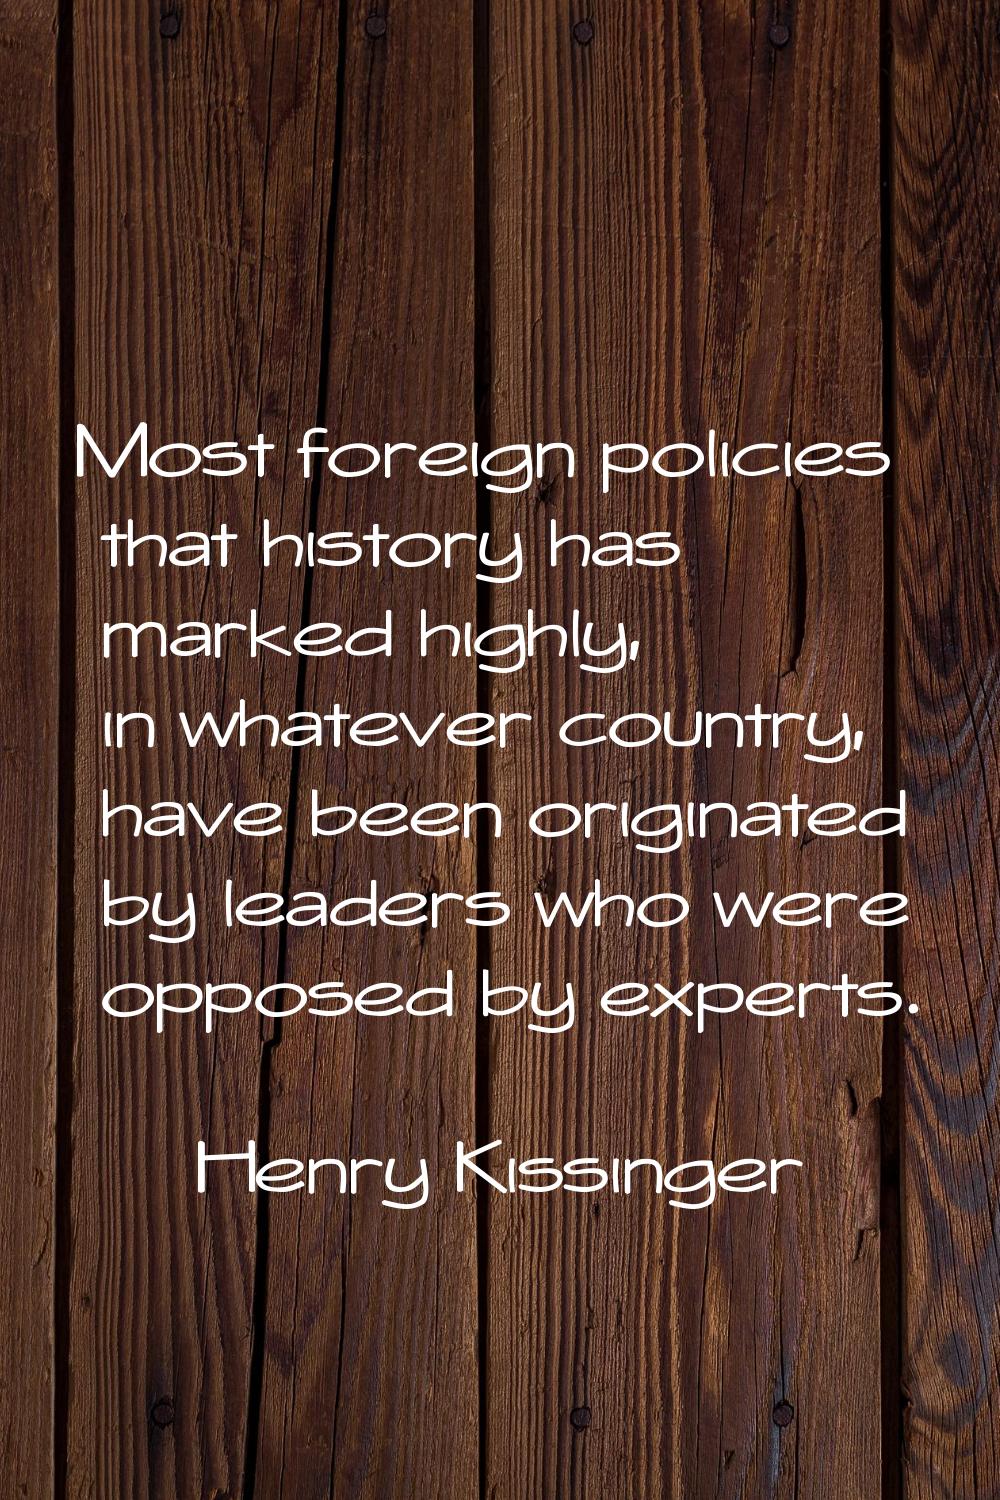 Most foreign policies that history has marked highly, in whatever country, have been originated by 